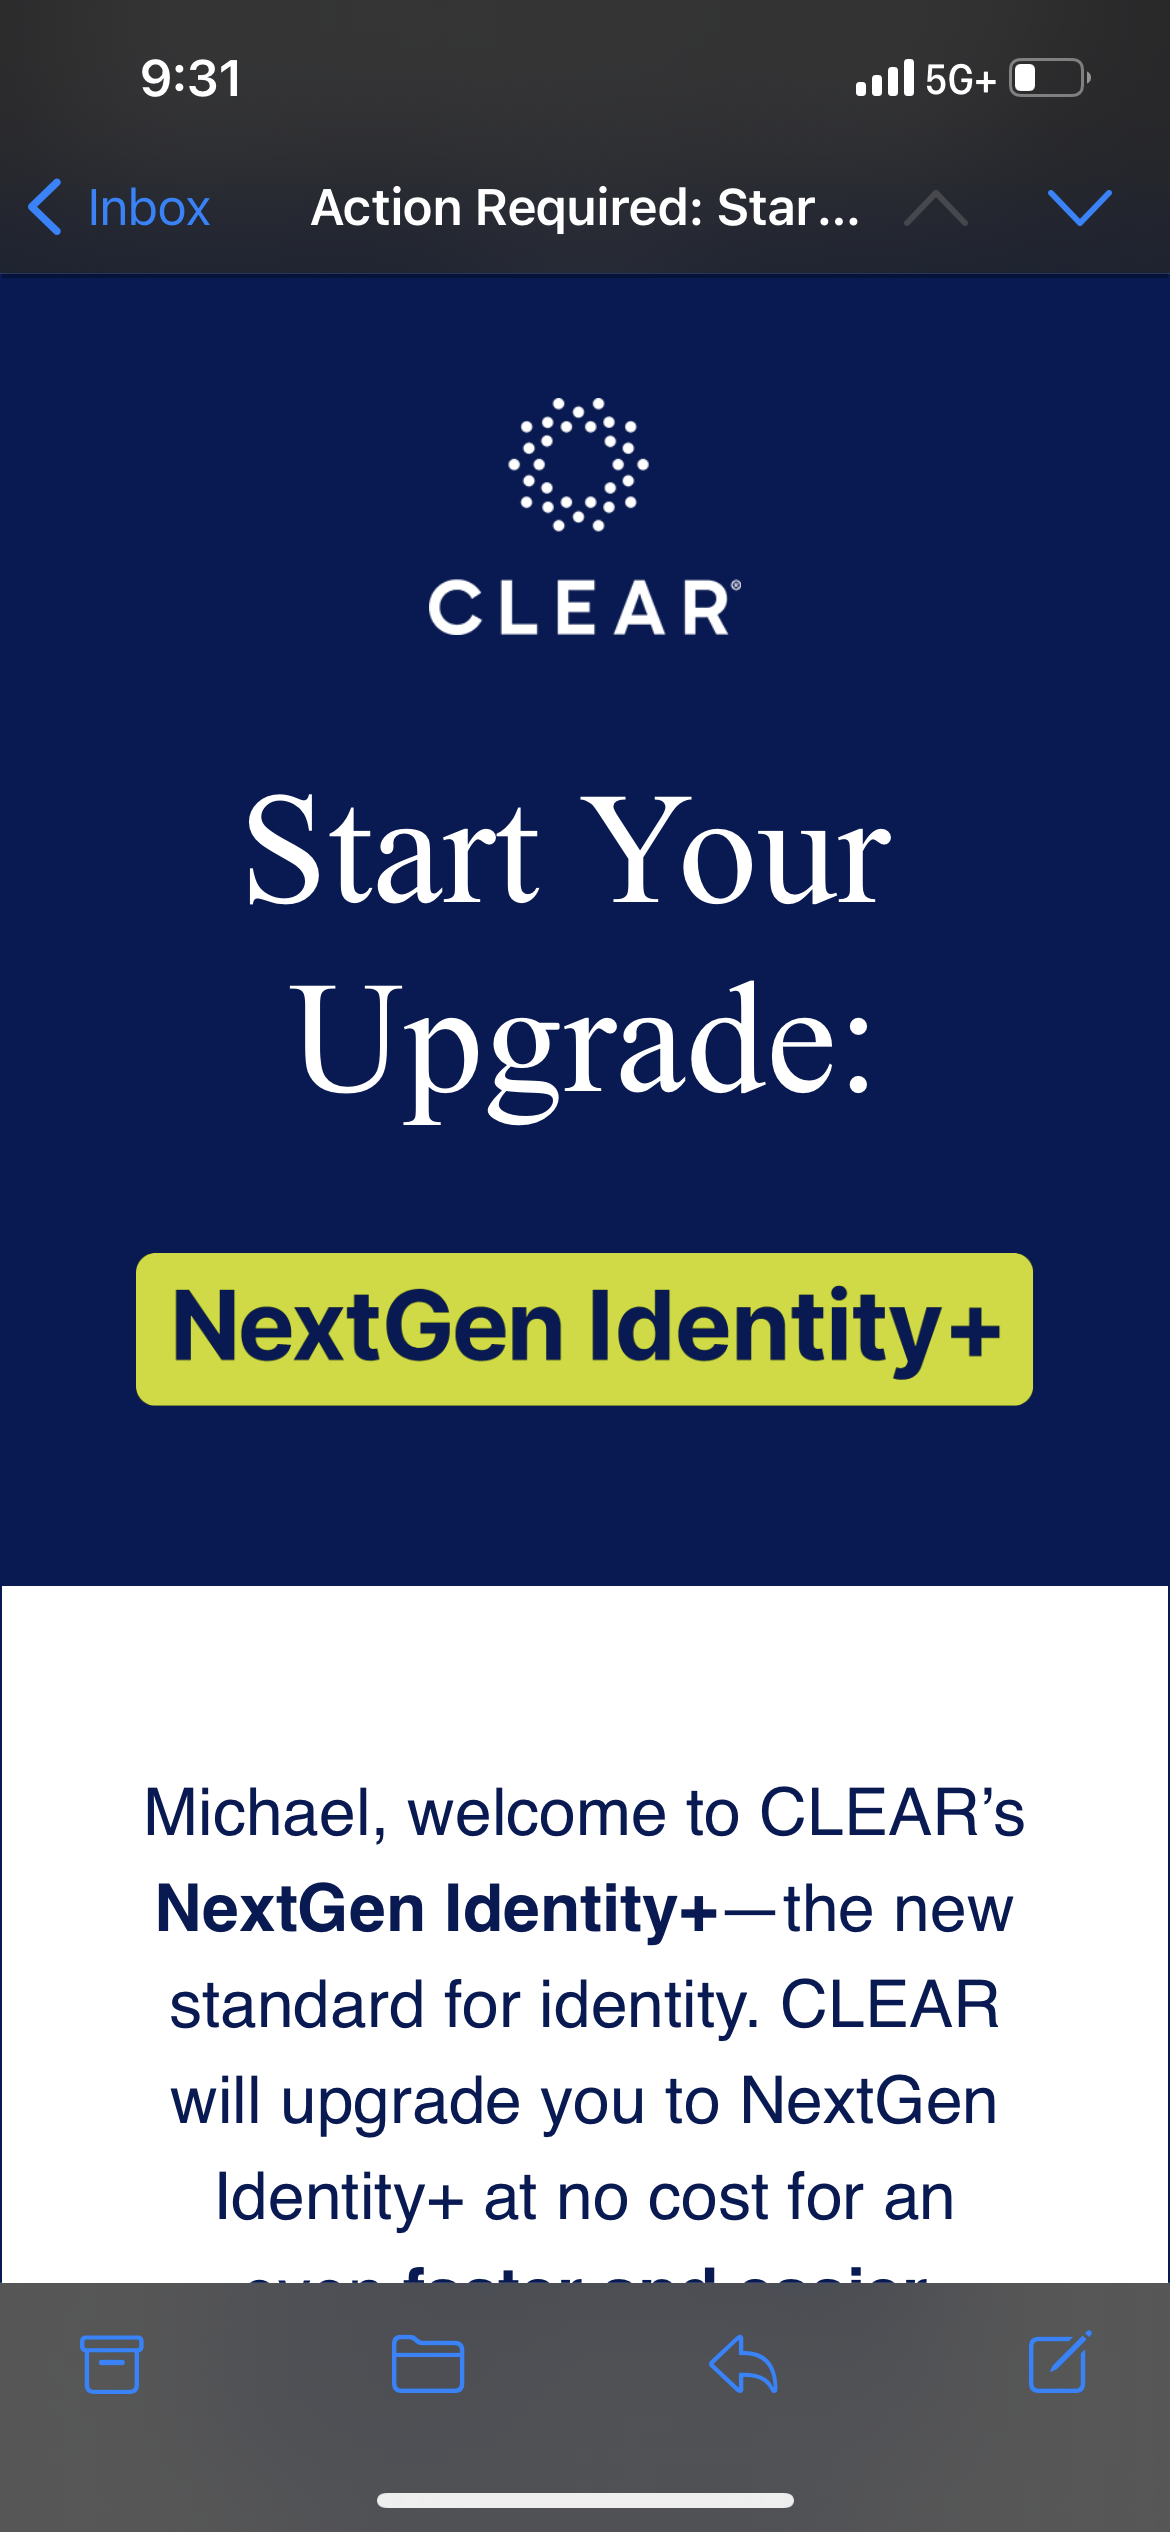 Email CLEAR members receive when being asked to upgrade to CLEAR NextGen Identity+.